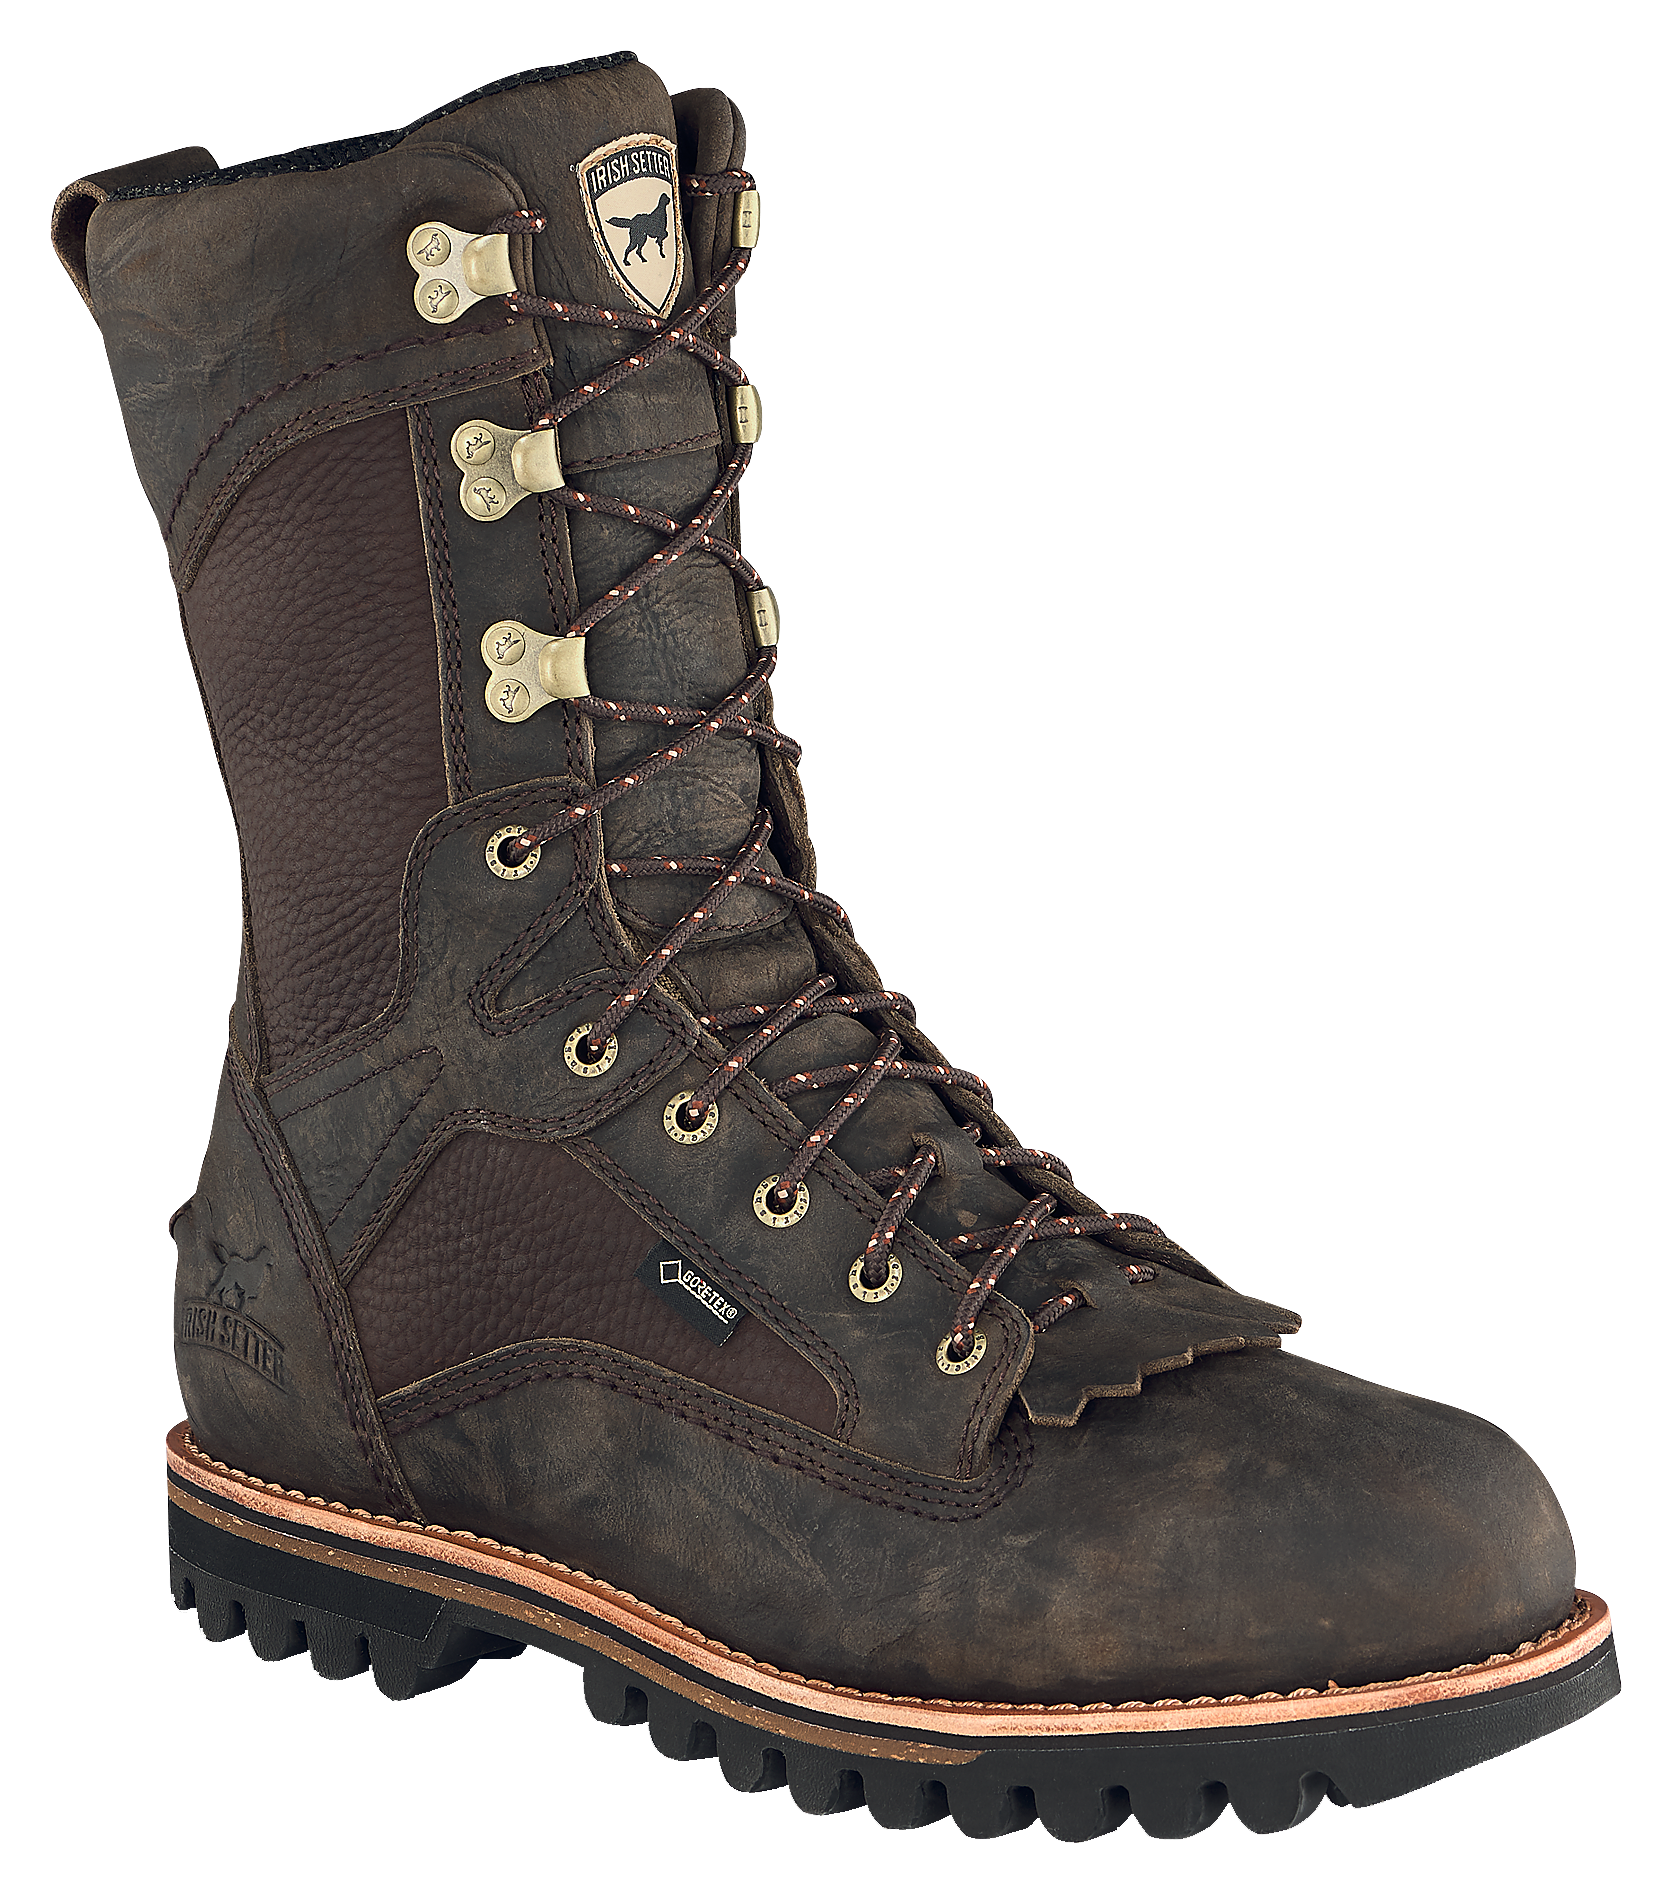 Irish Setter Elk Tracker GORE-TEX Insulated Hunting Boots for Men - Brown - 10M